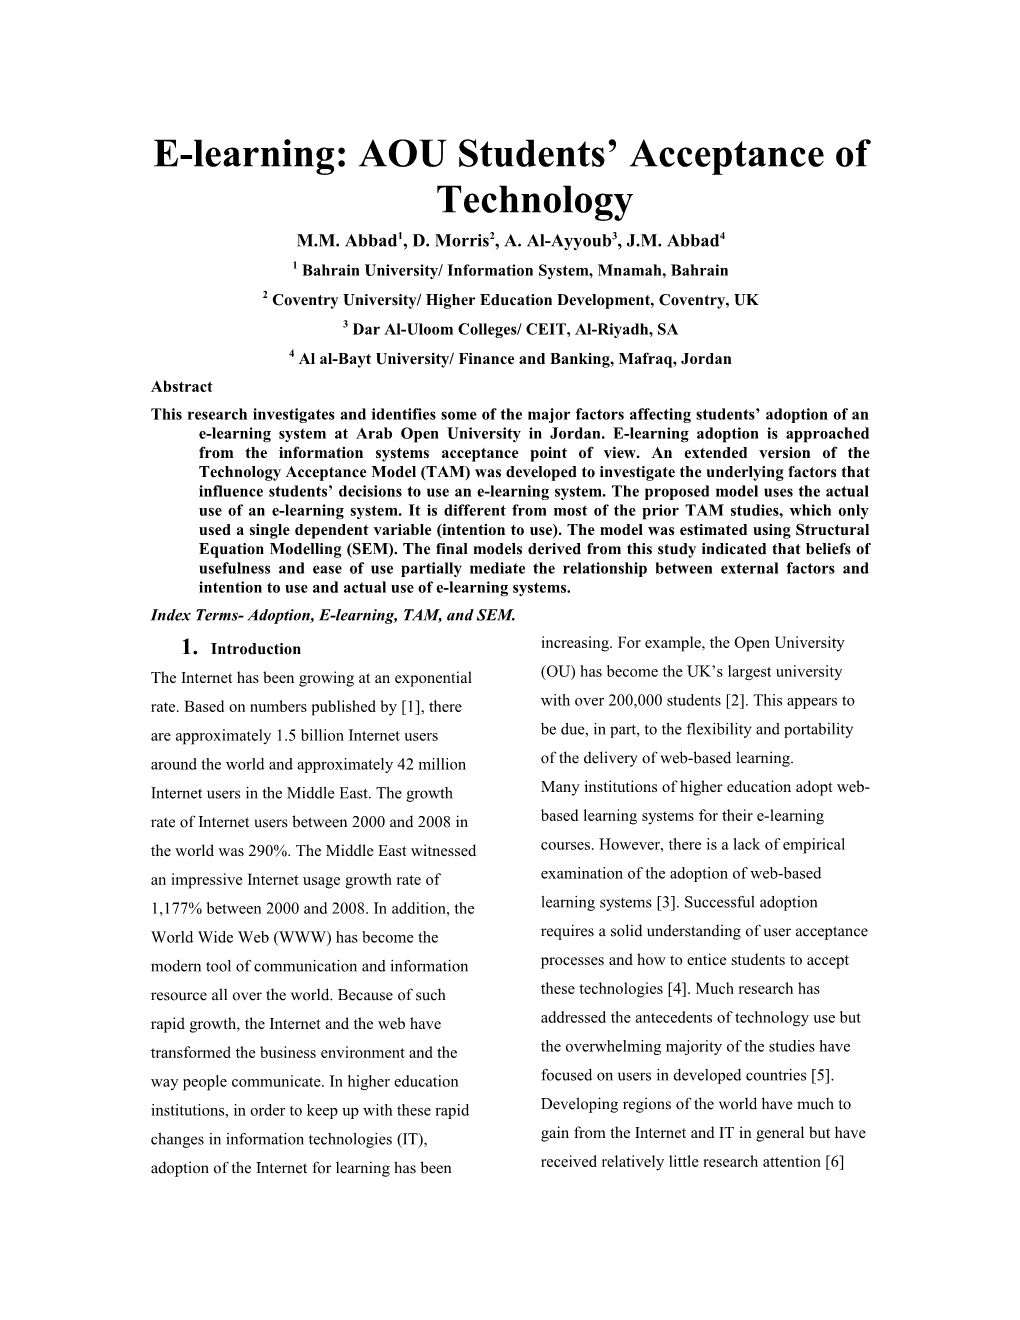 E-Learning: AOU Students Acceptance of Technology